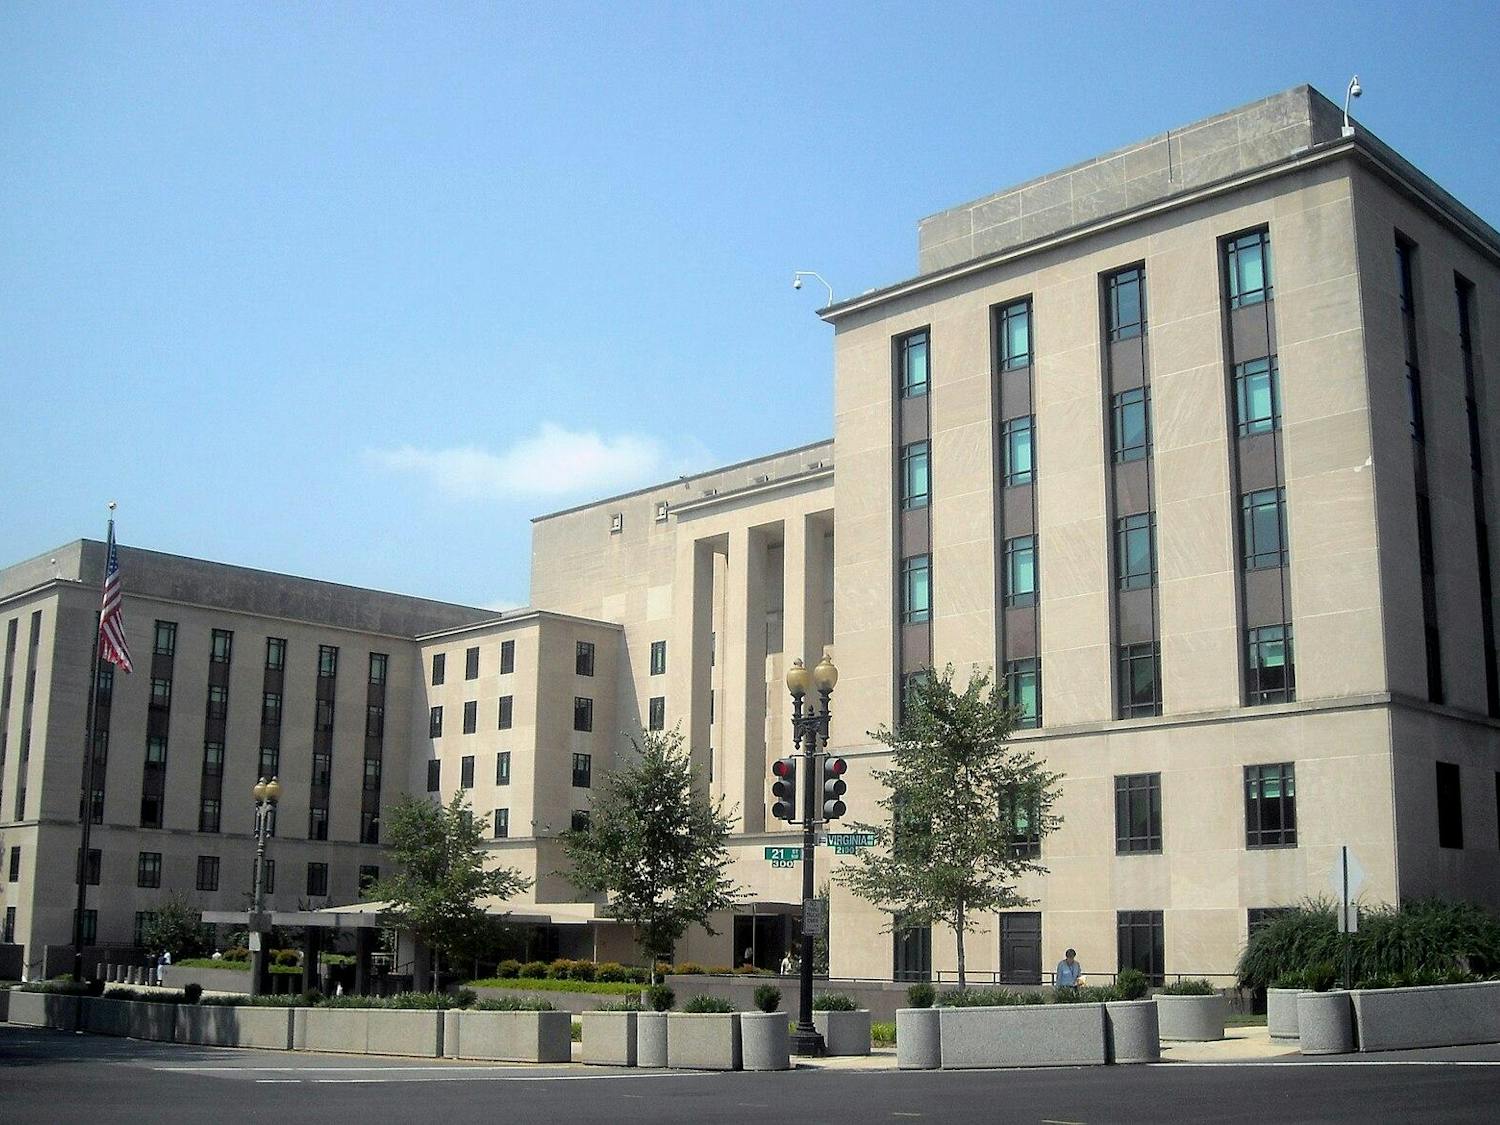 The Harry S. Truman building, headquarters of the U.S. Department of State, is pictured.